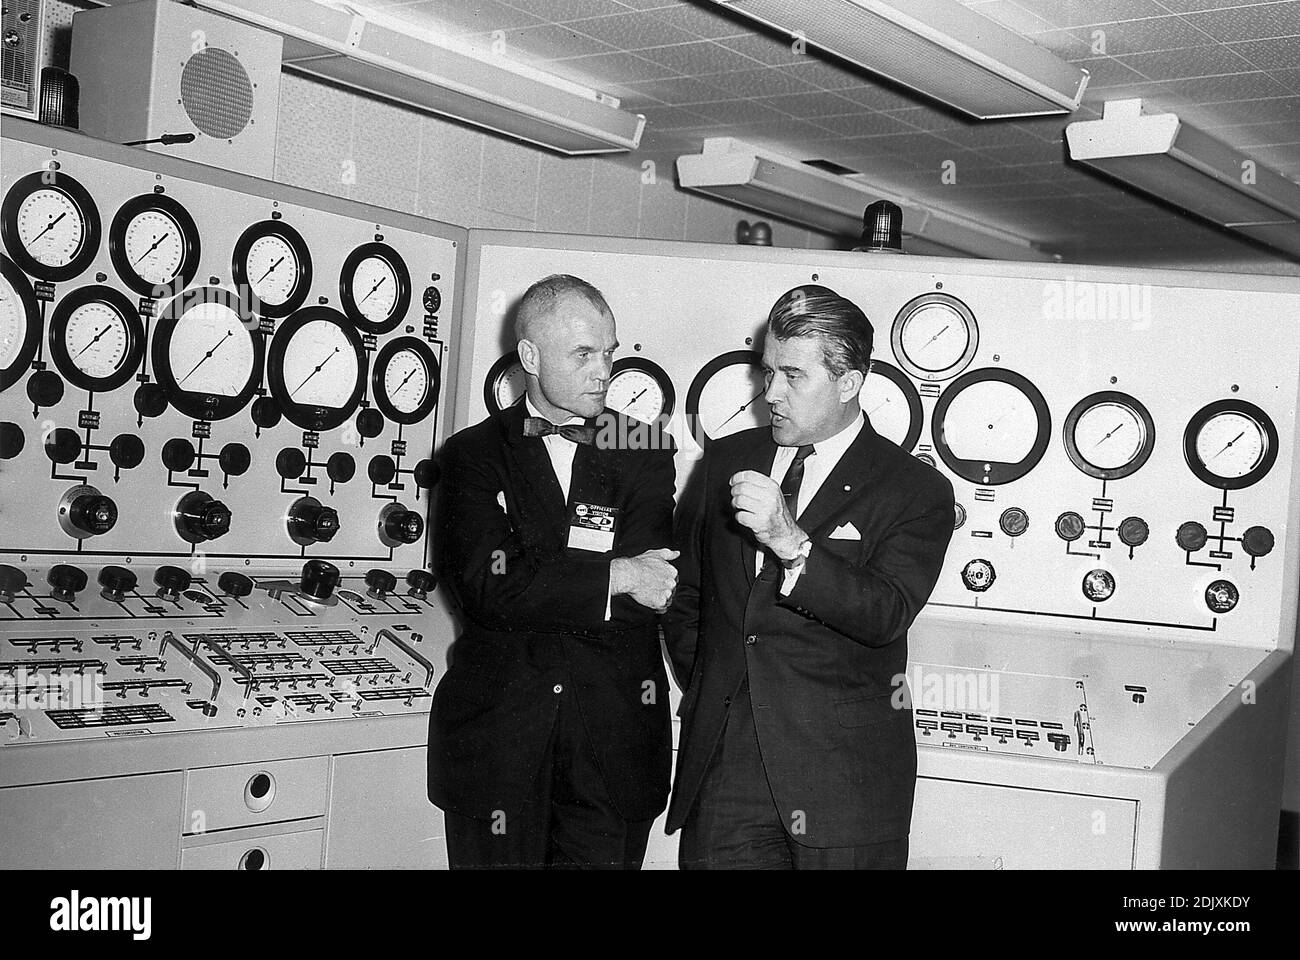 Dr. Wernher von Braun, right, briefs Astronaut John Glenn, left, in the control room of the Vehicle Test Section, Quality Assurance Division, Marshall Space Flight Center (MSFC) in Huntsville, Alabama, November 28, 1962. Photo by NASA via CNP/ABACAPRESS.COM Stock Photo